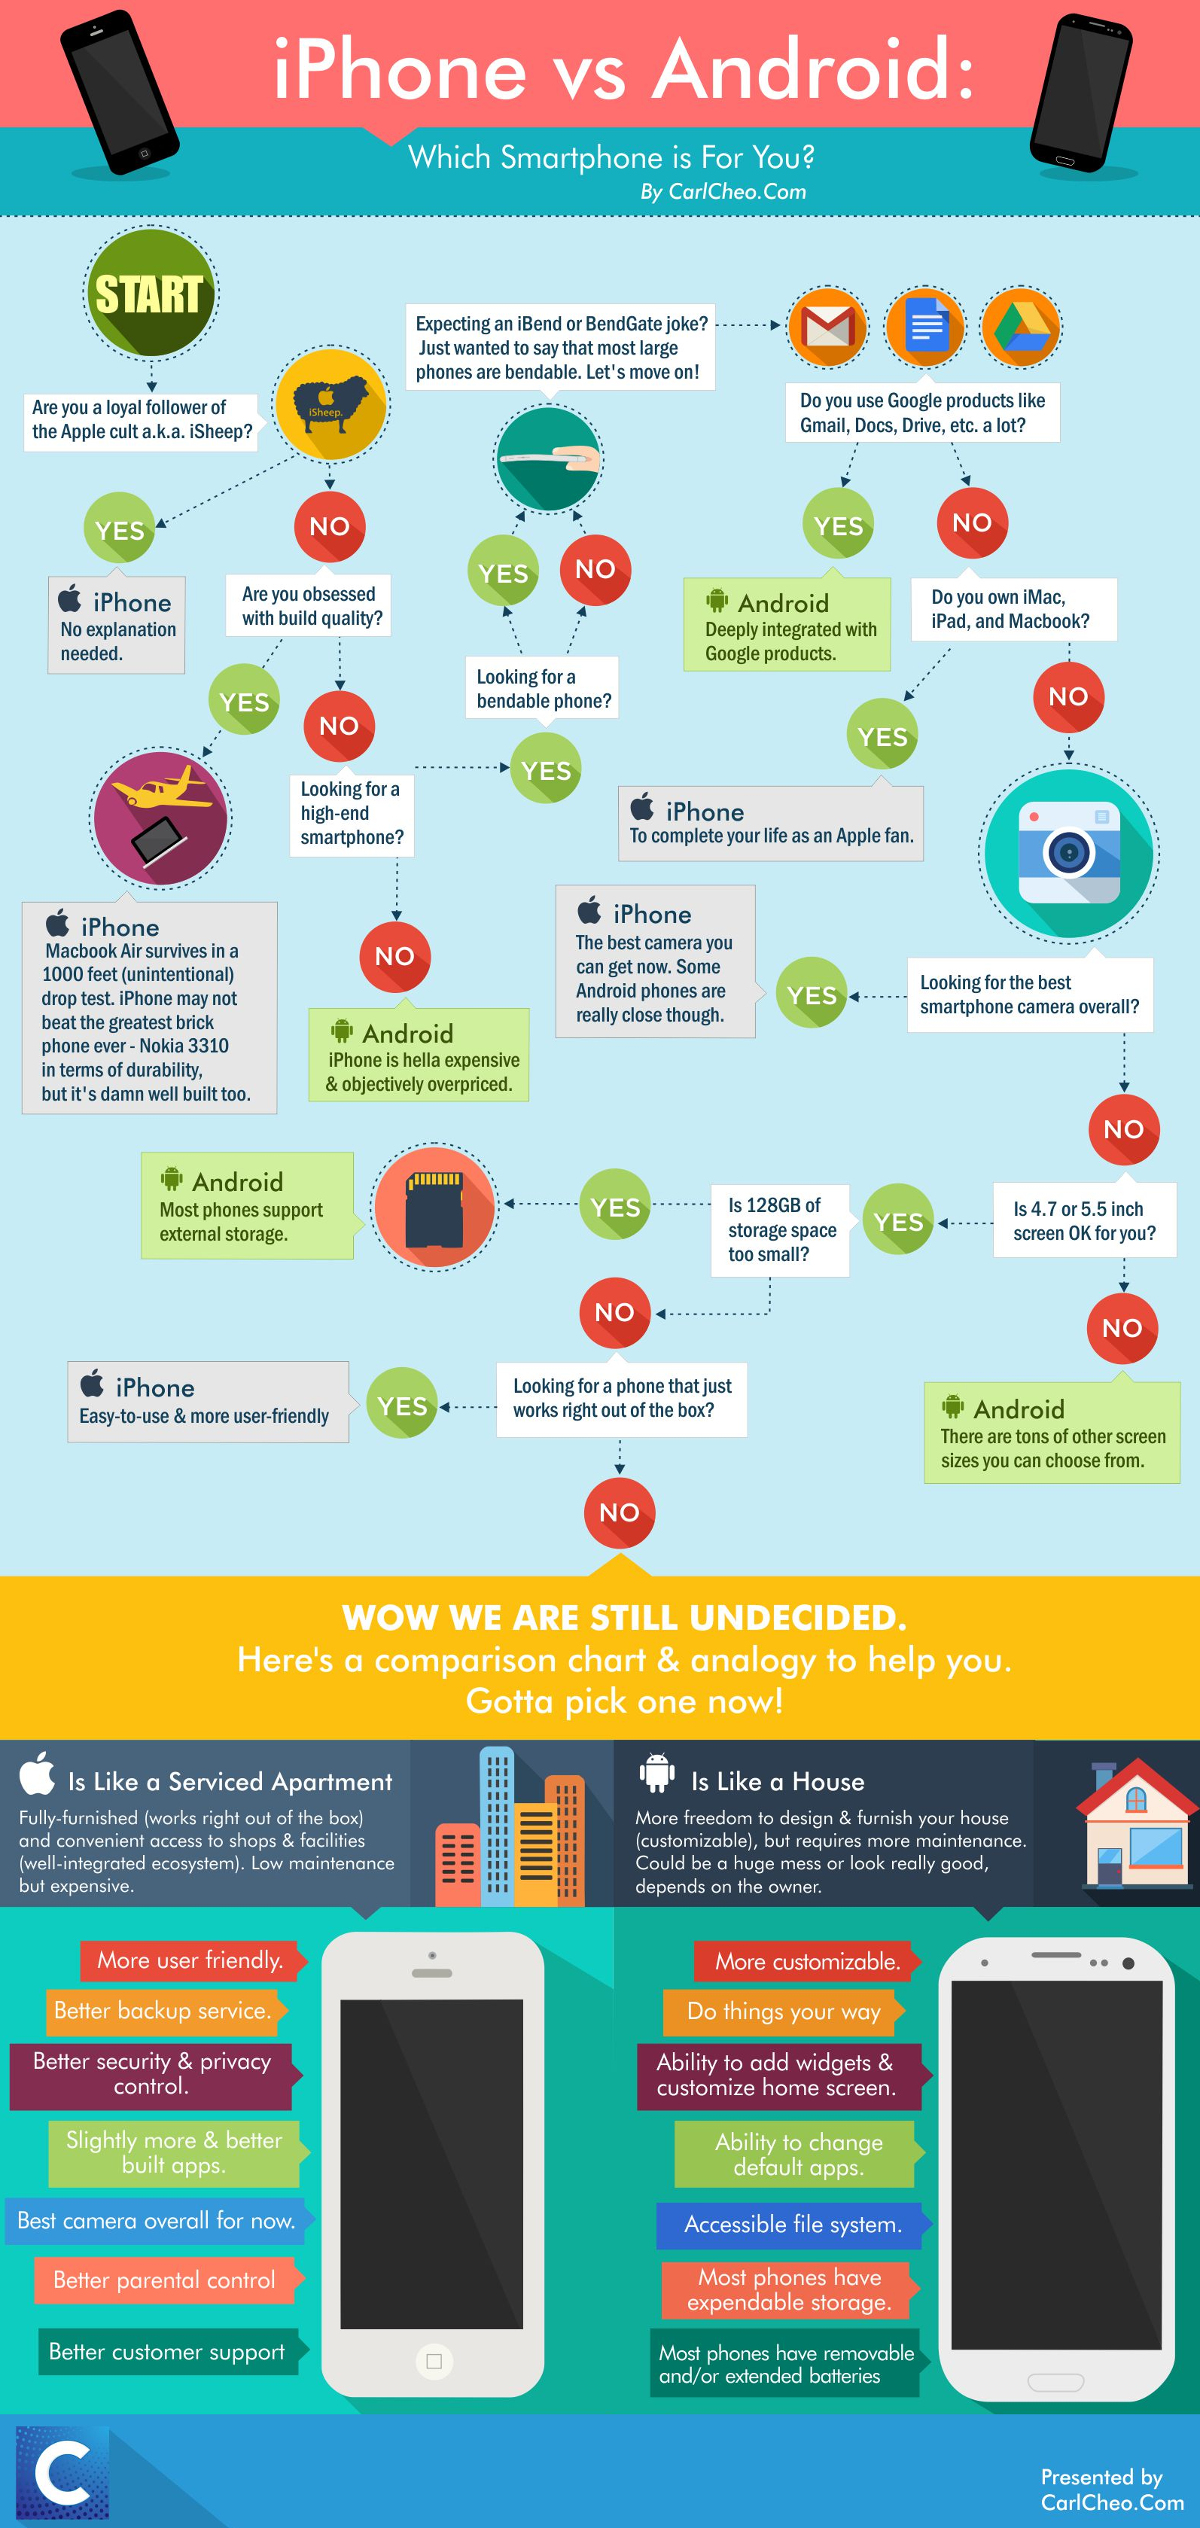 Should You Buy An Android Or iPhone? [Infographic]